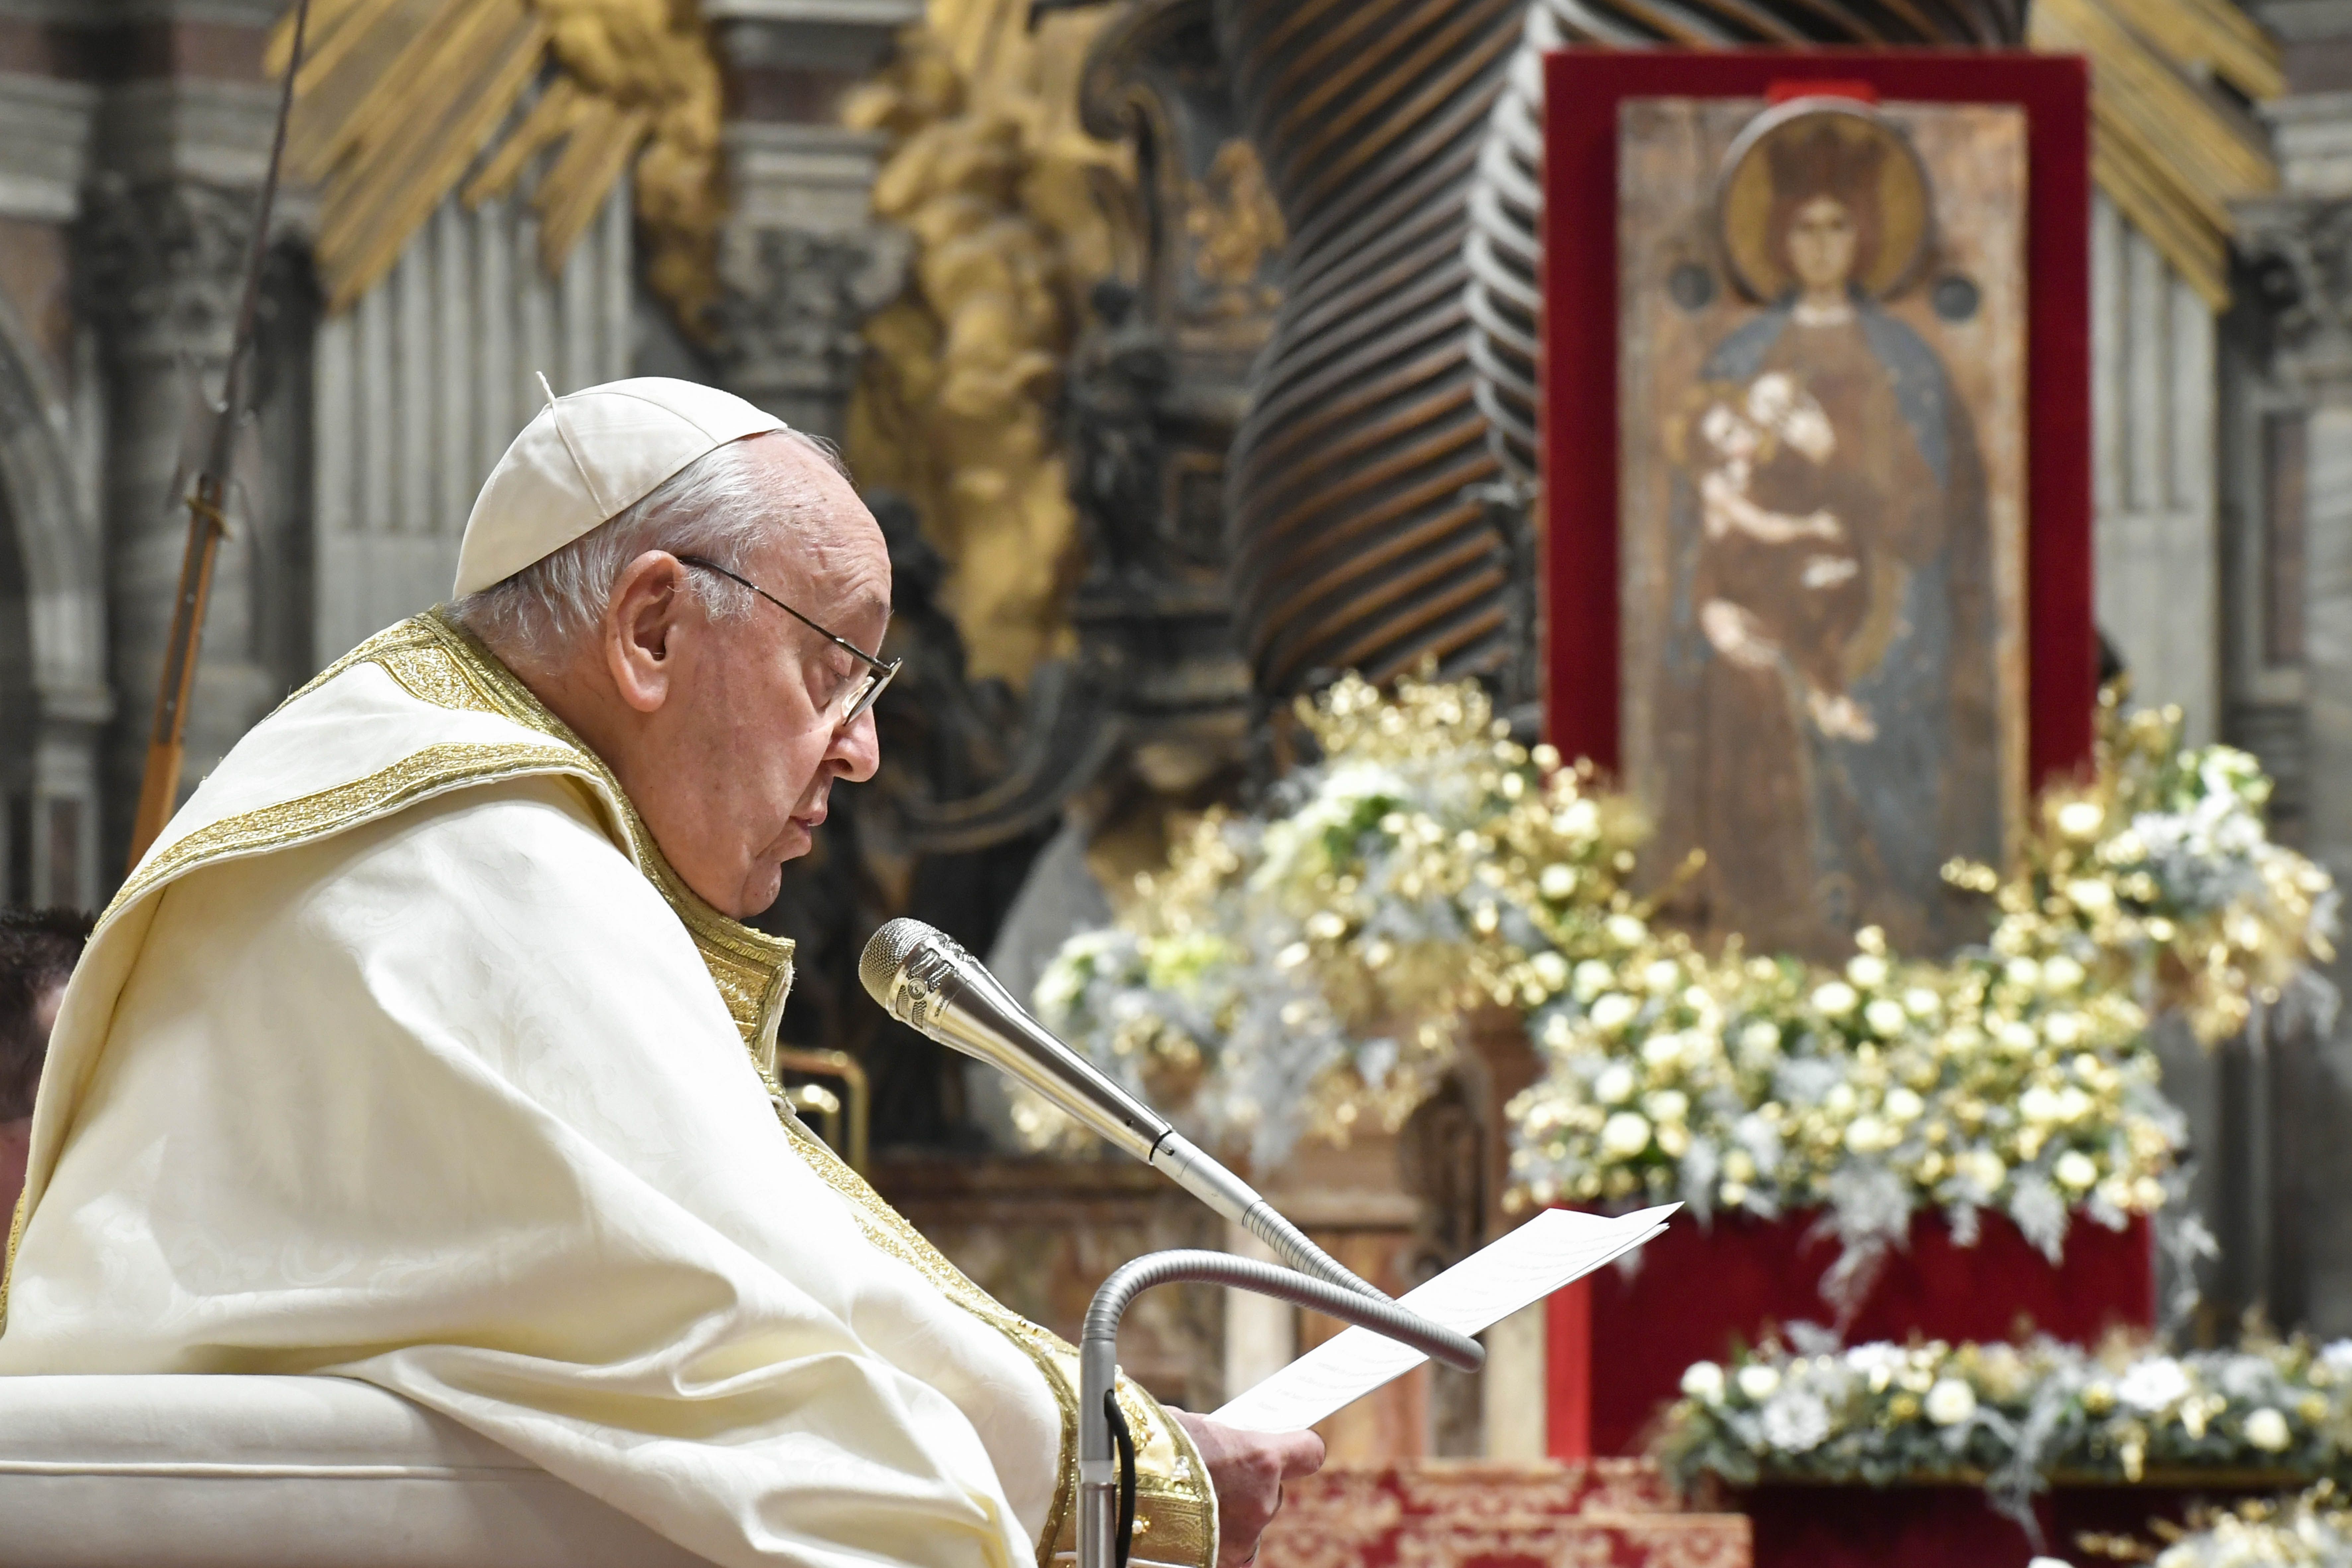 Pope Francis: Faith allows Christians to live transition into the new year ‘differently’